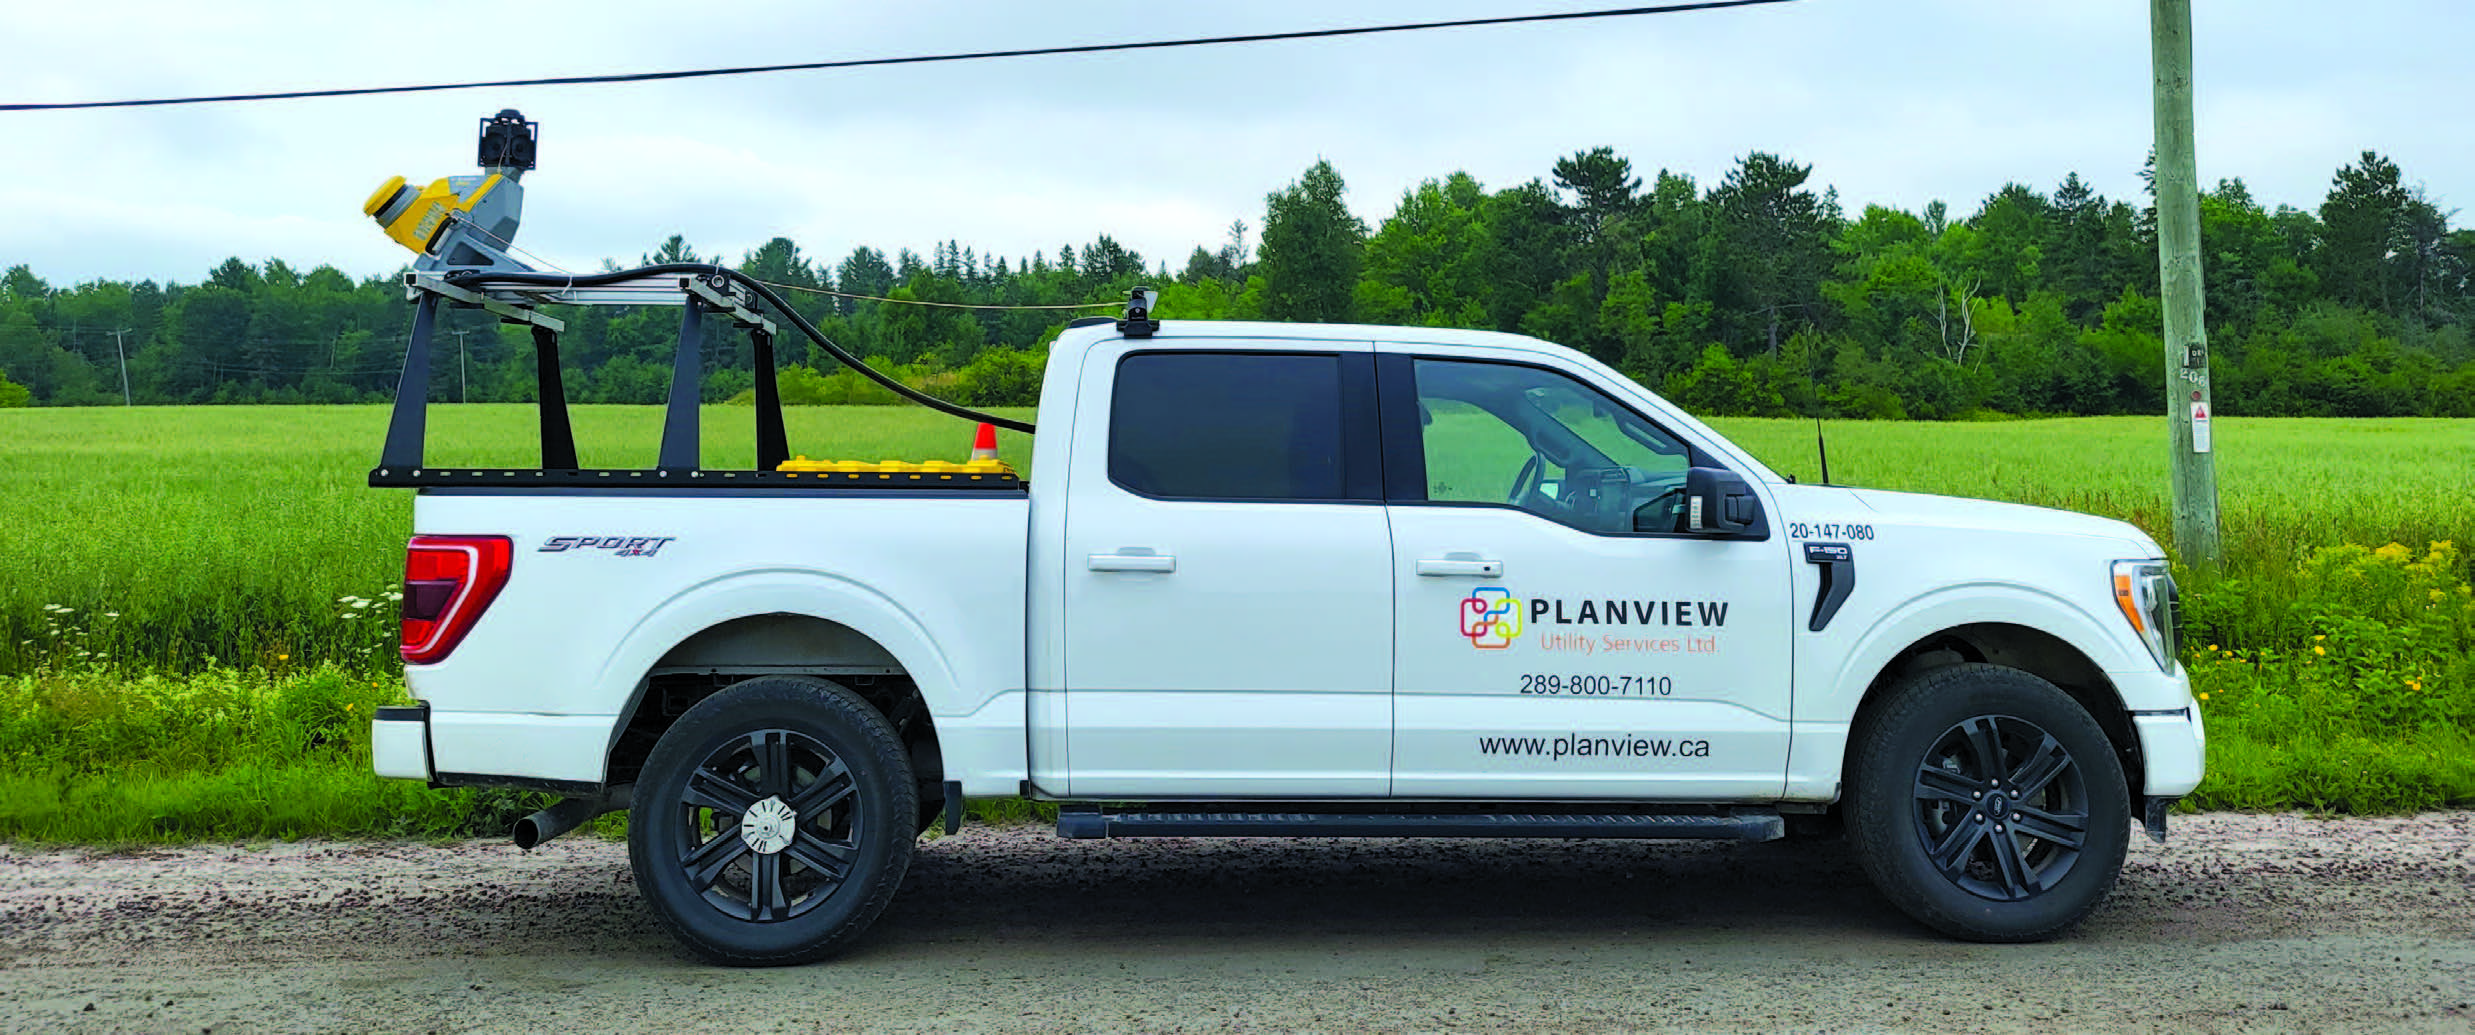 Plainview Truck with MX50